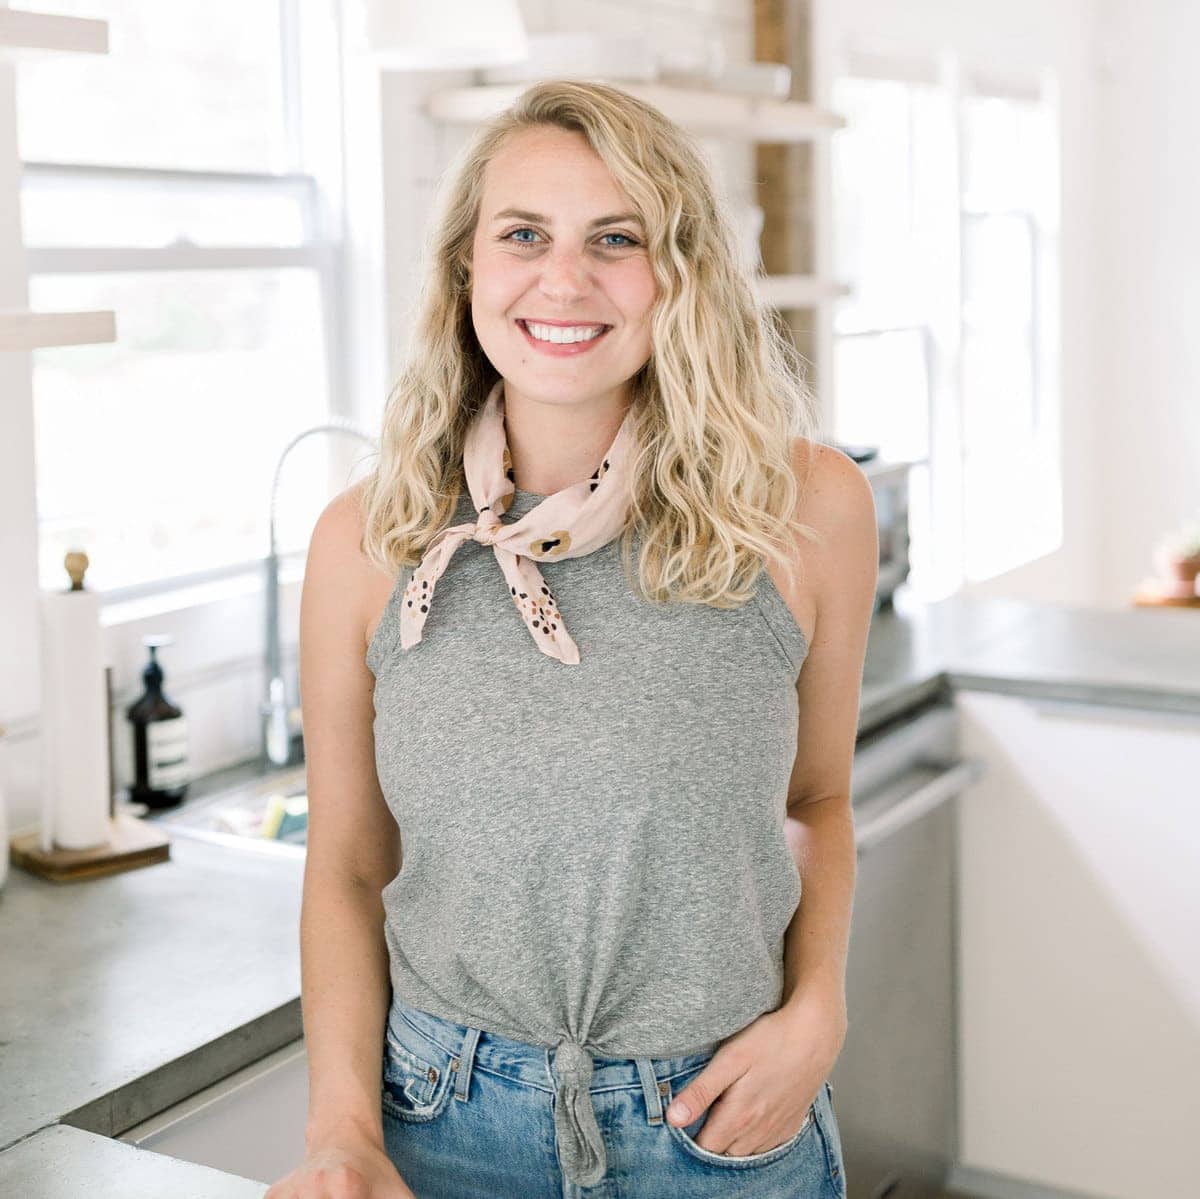 A fit foodie finds a blonde woman in a gray tank top and jeans standing in a kitchen.